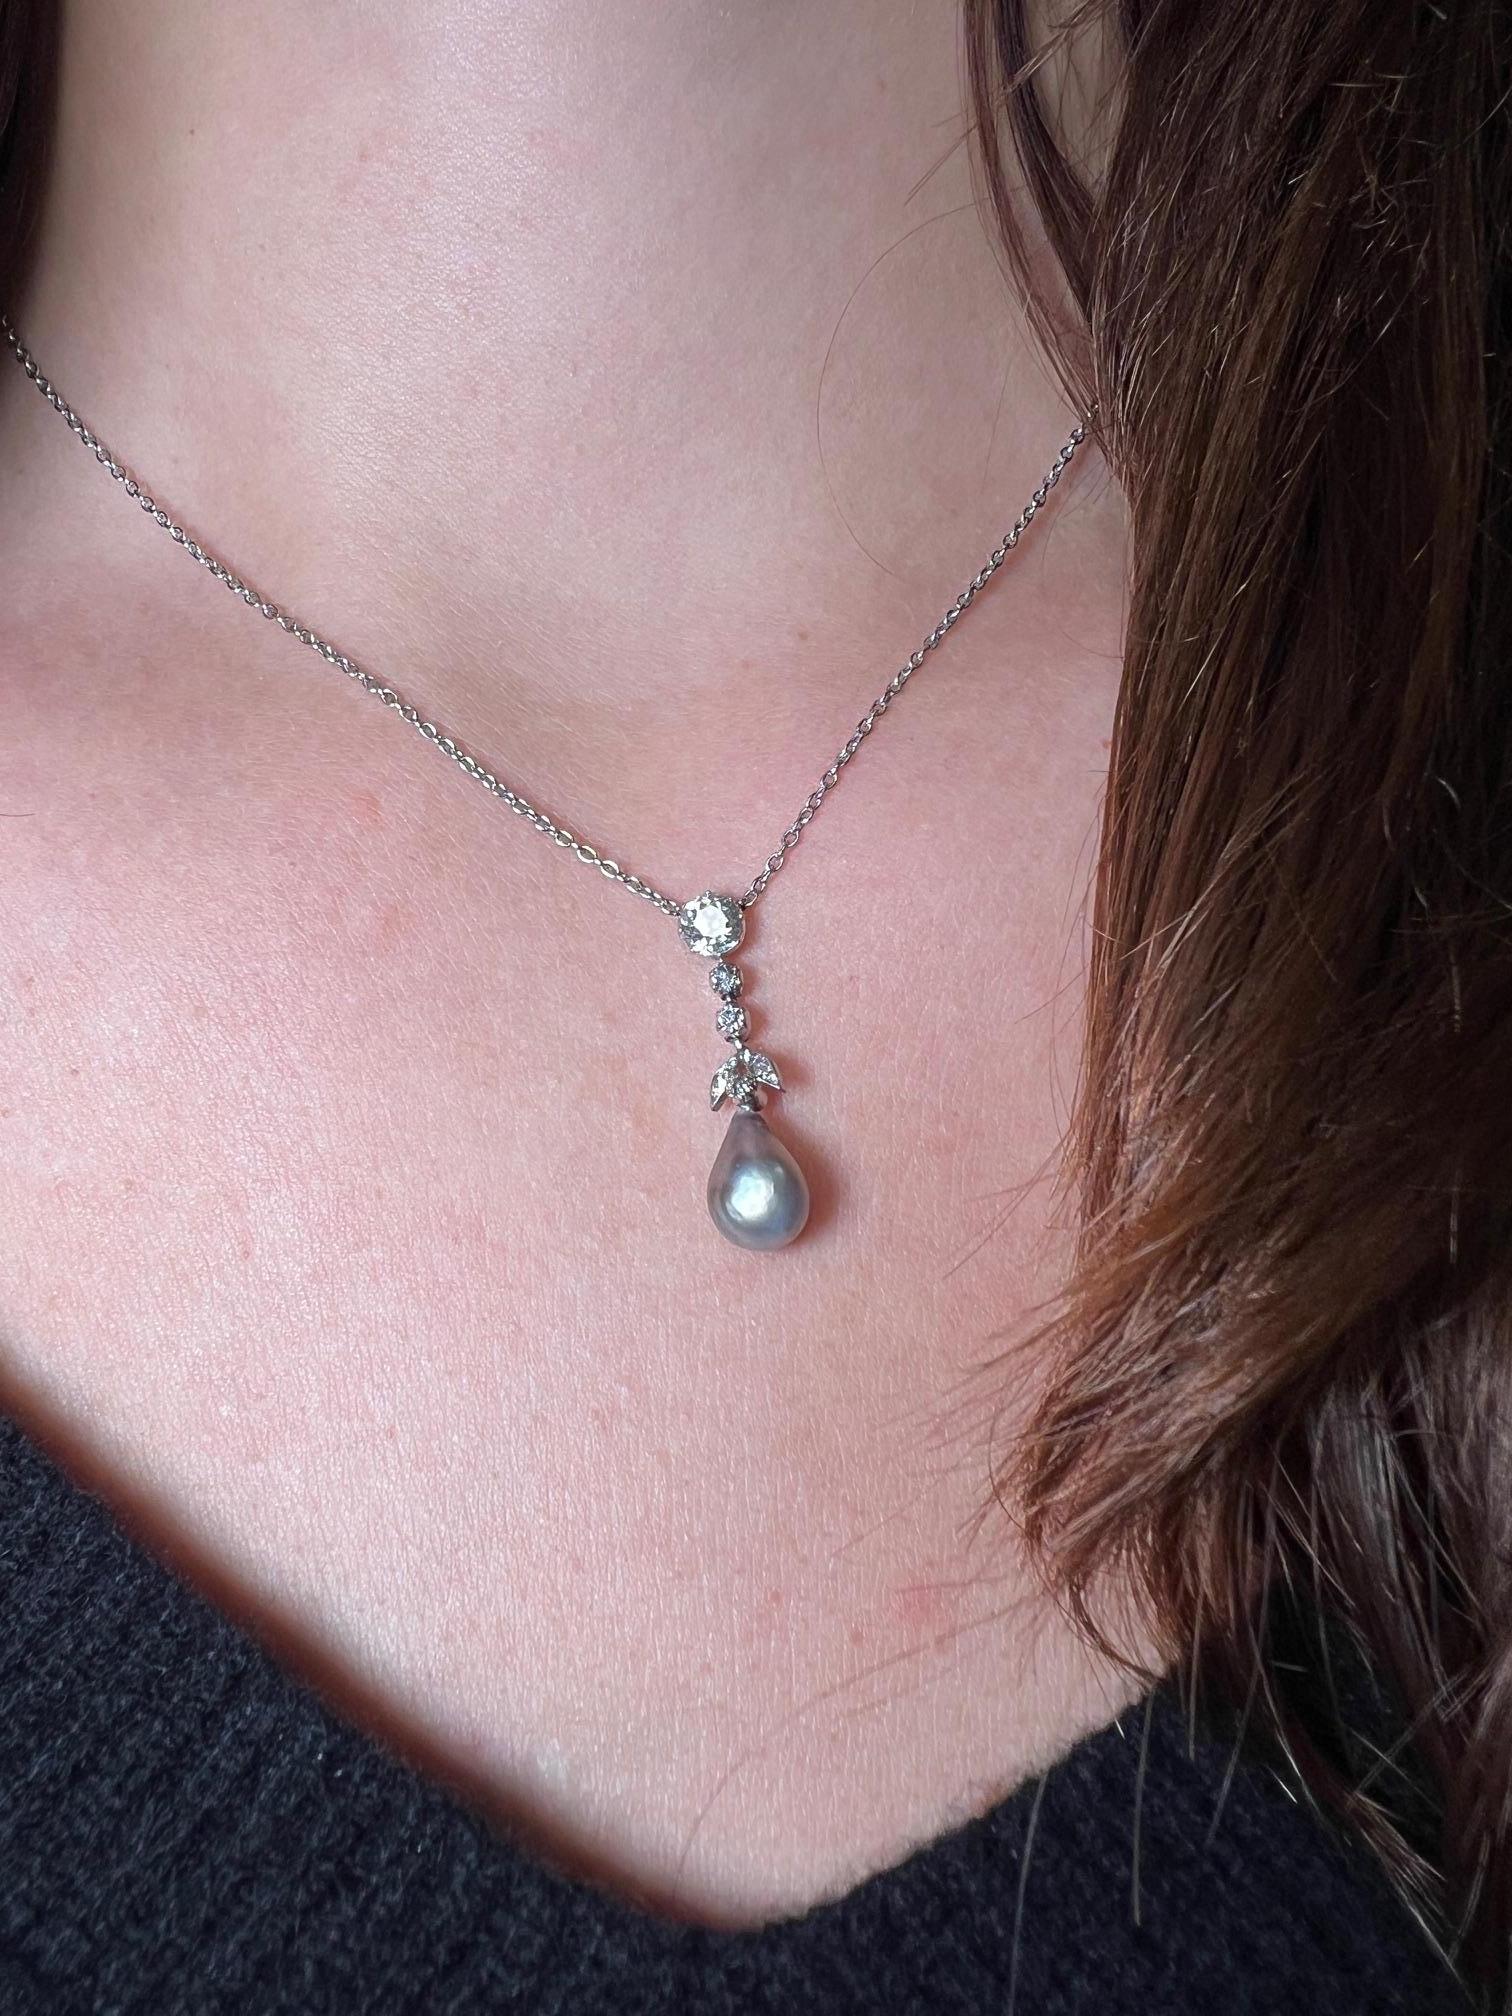 This beautiful drop shaped pearl necklace is set on a pendant with one old European cut diamond and five single cut natural diamonds. The platinum necklace holds this stunning pendant - a timeless piece. 